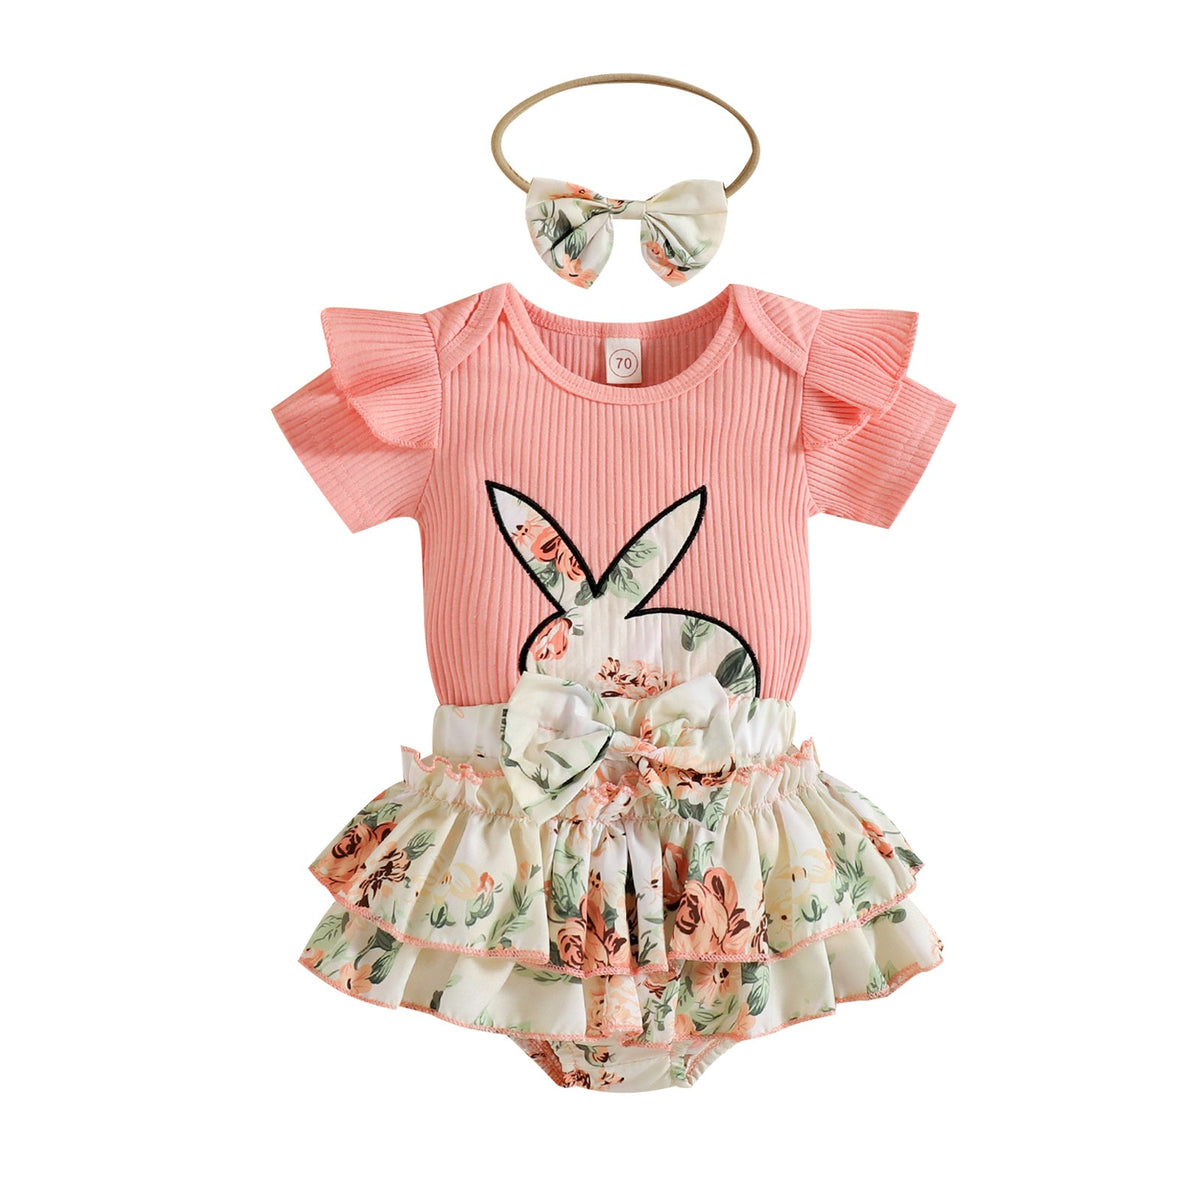 Cute Bunny Embroidered Suit Pawlulu